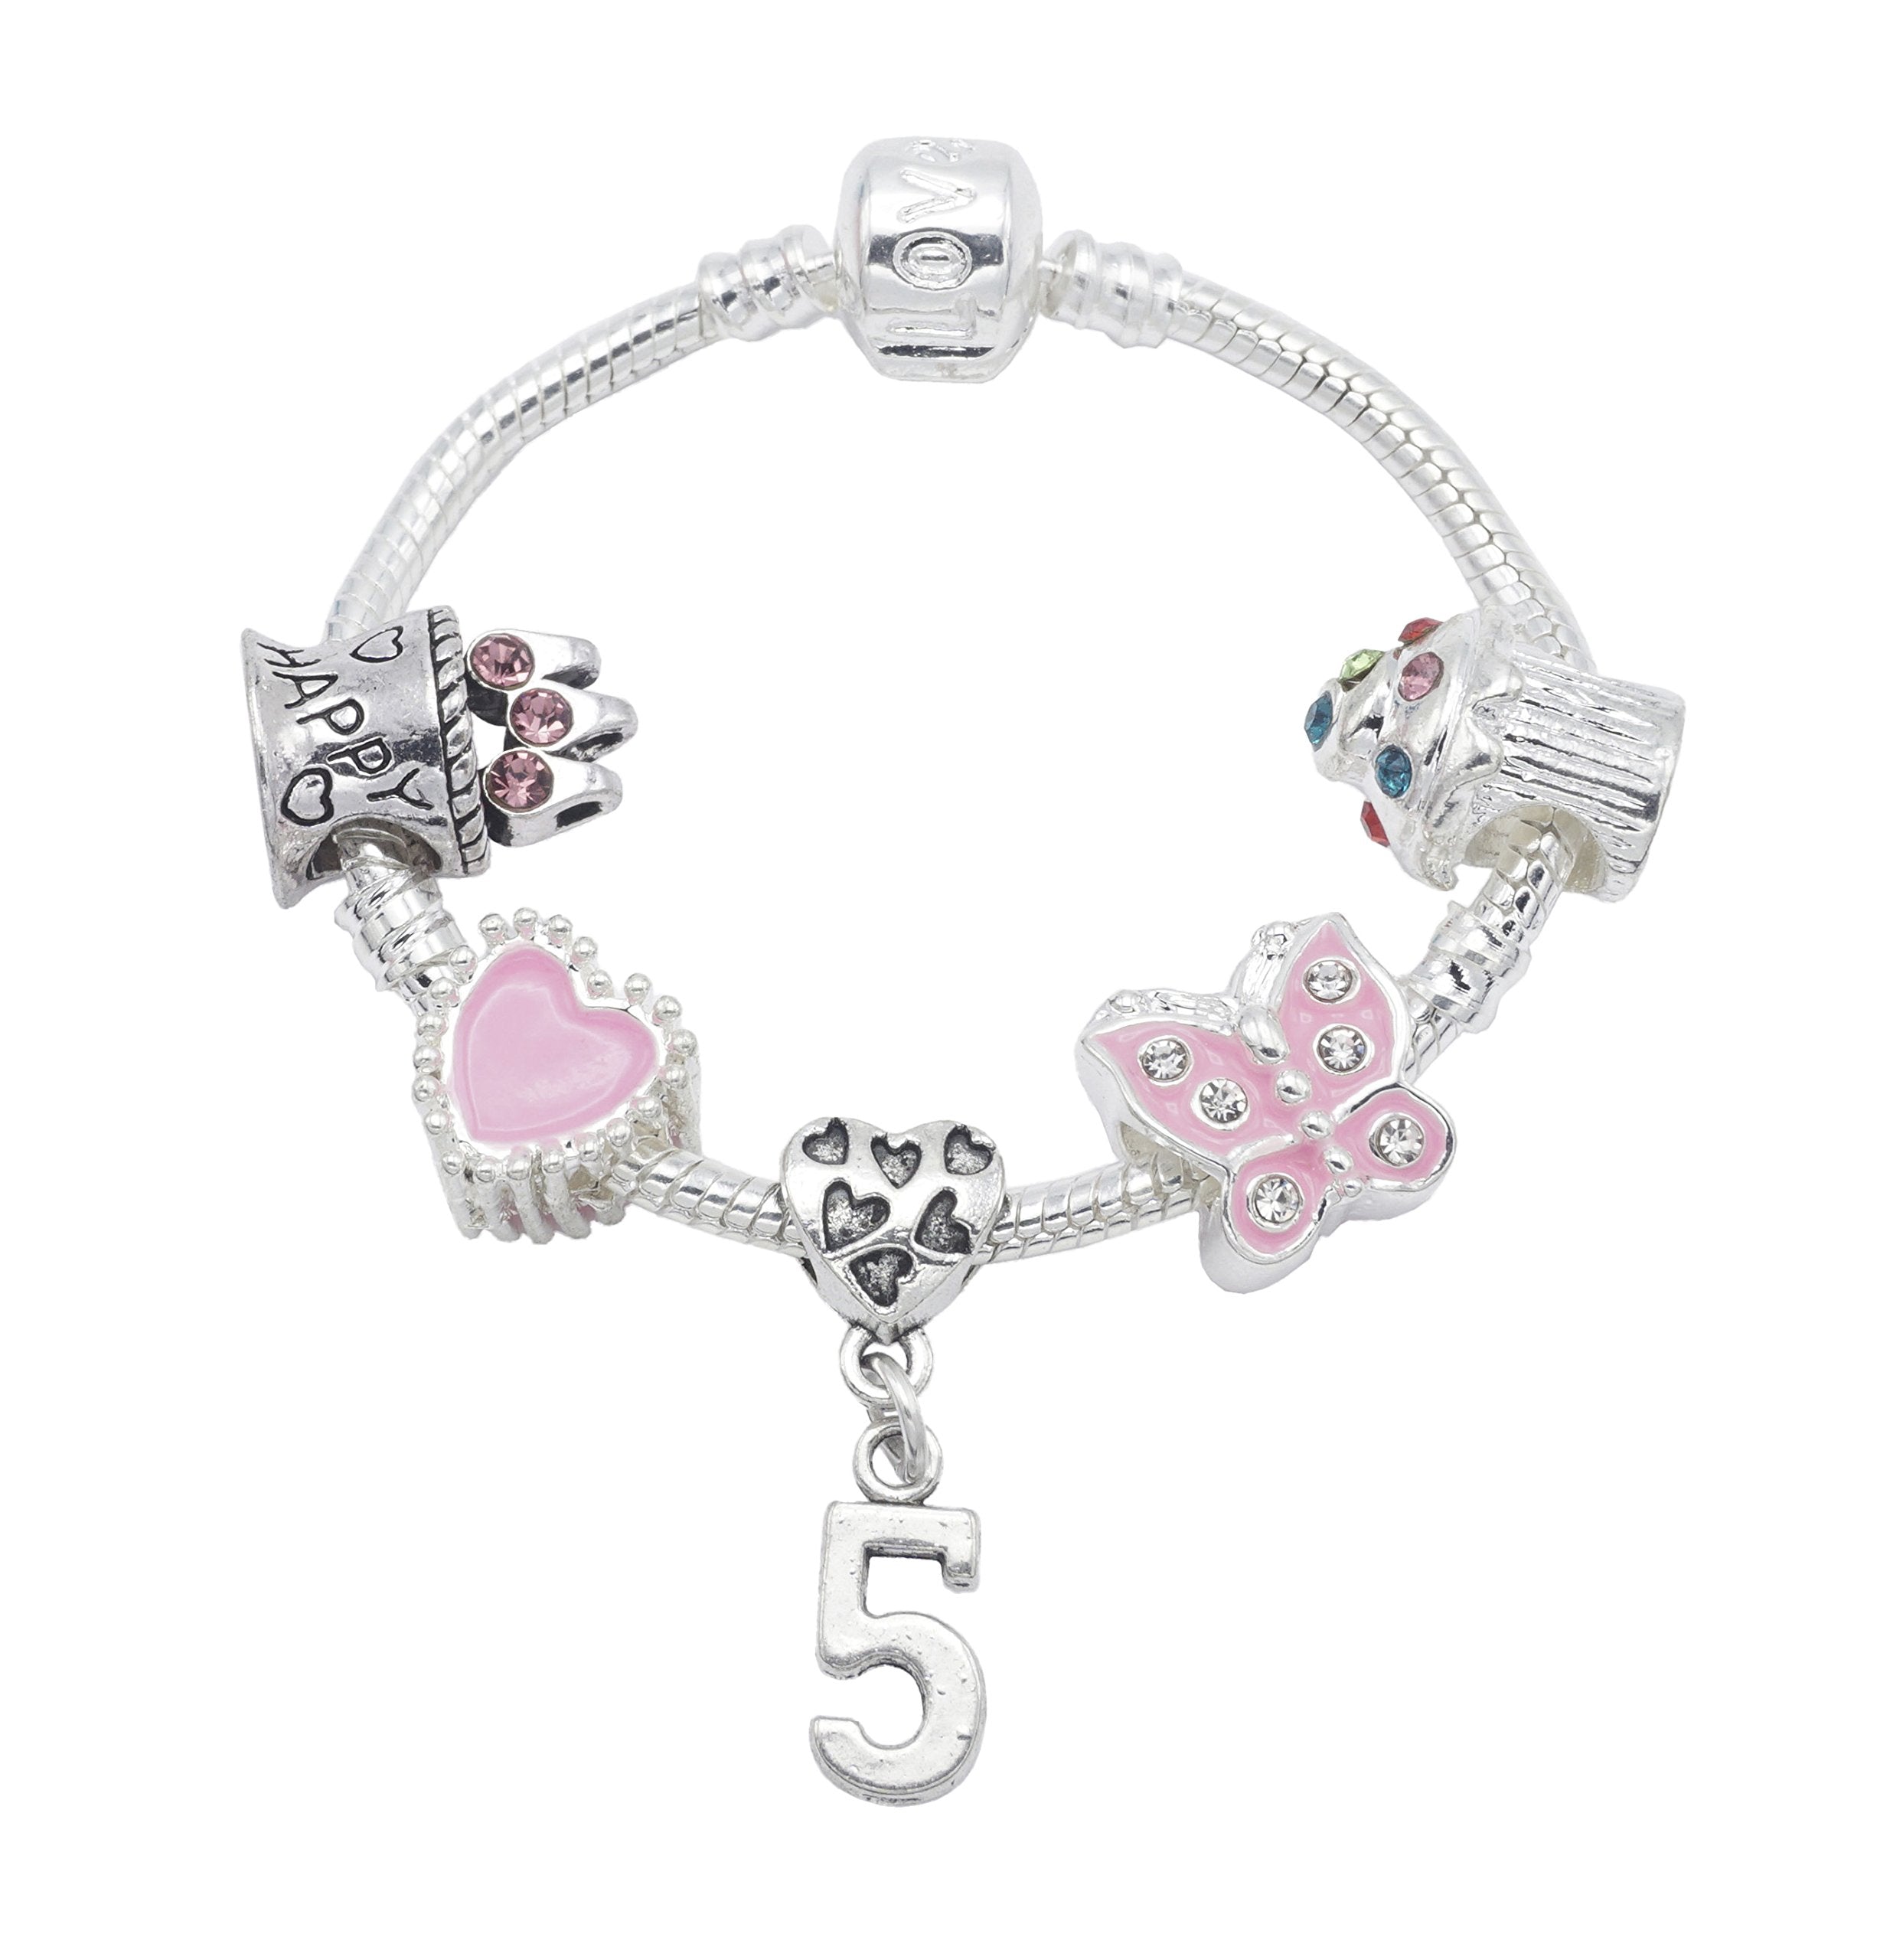 5th Birthday Silver Plated Charm Bracelet for Girls with Gift Box